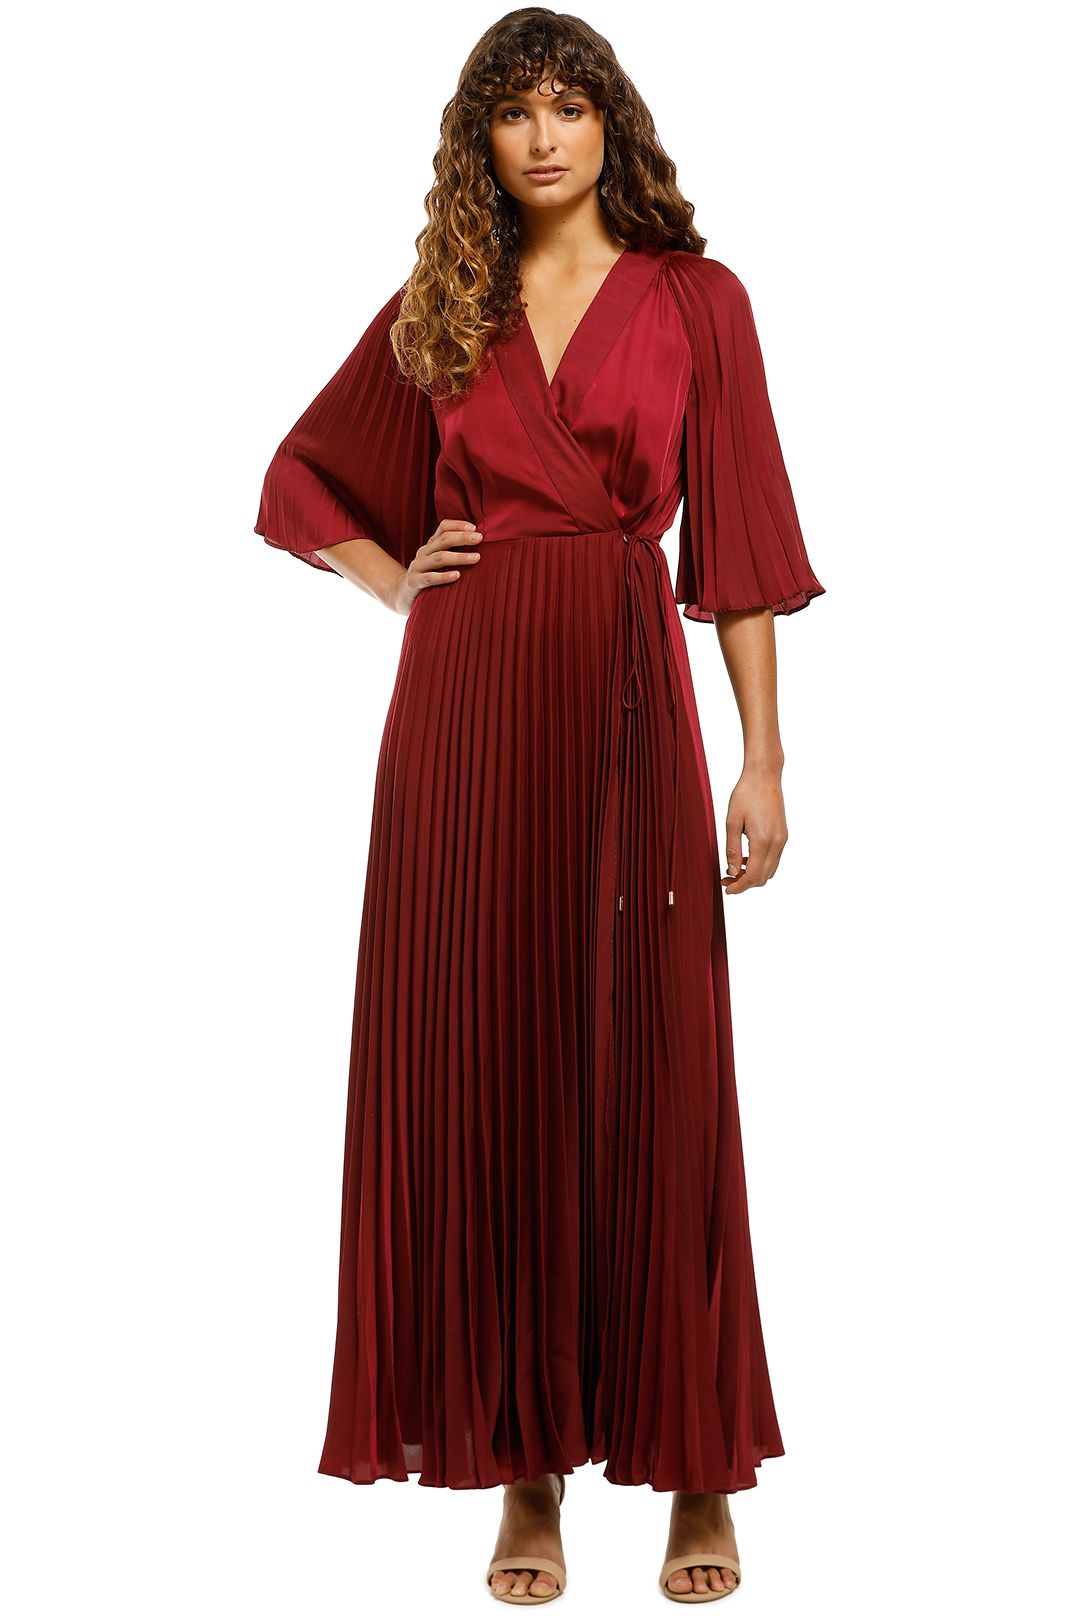 Ginger-and-Smart-Tempera-Wrap-Gown-Burgundy-Front